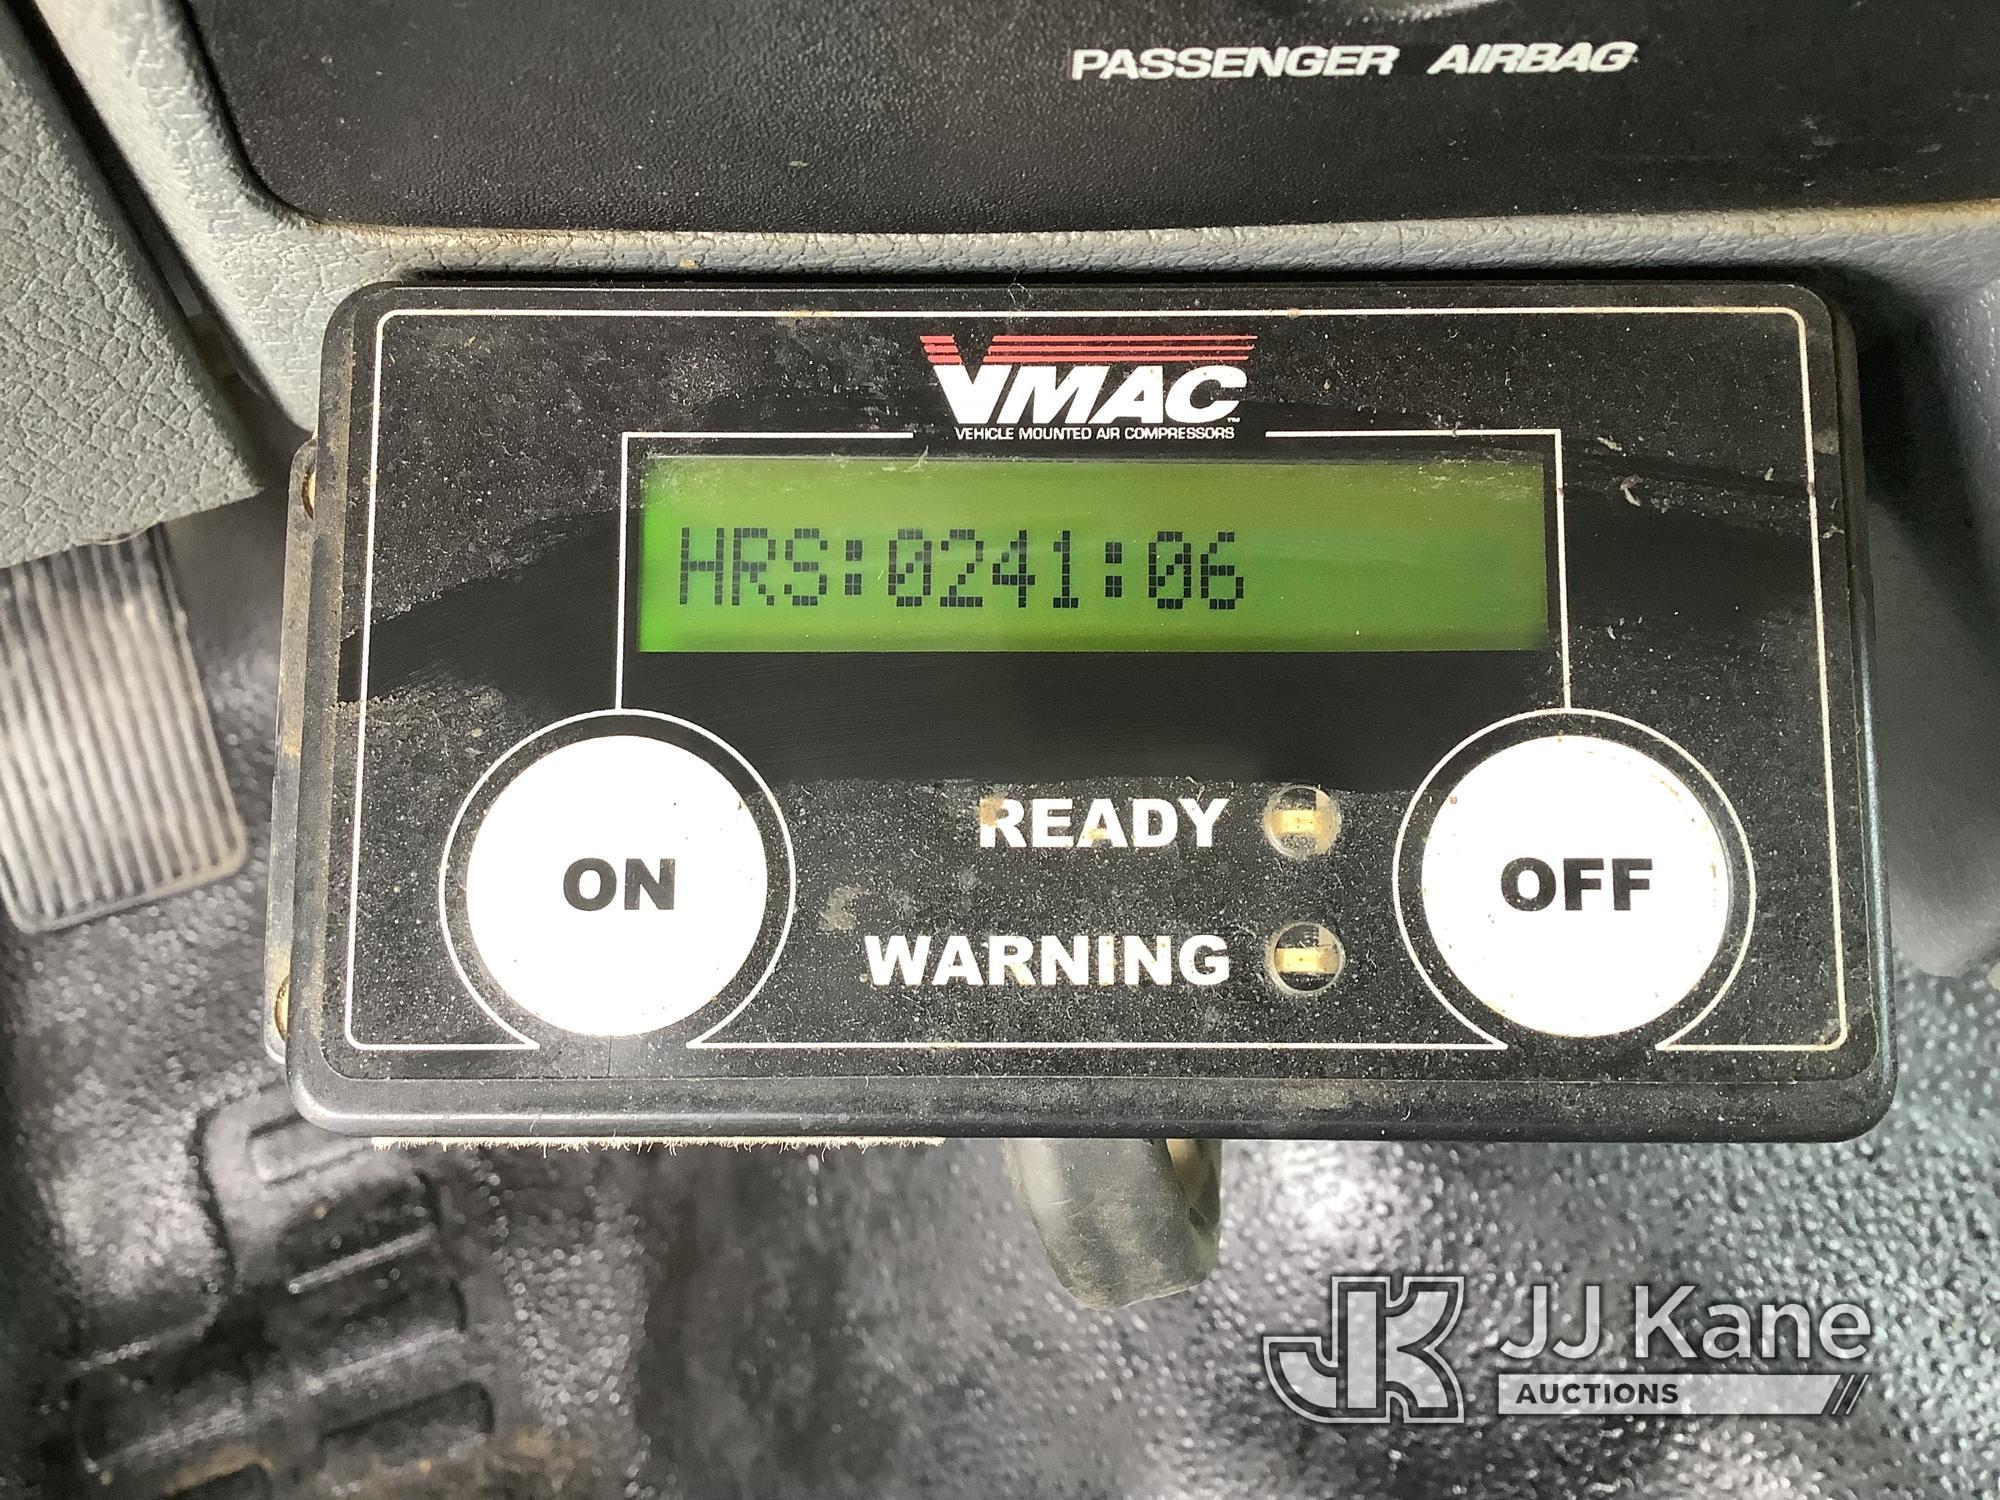 (Smock, PA) 2015 Ford F550 Air Compressor/Enclosed Utility Truck Runs Rough & Moves, Engine Light On